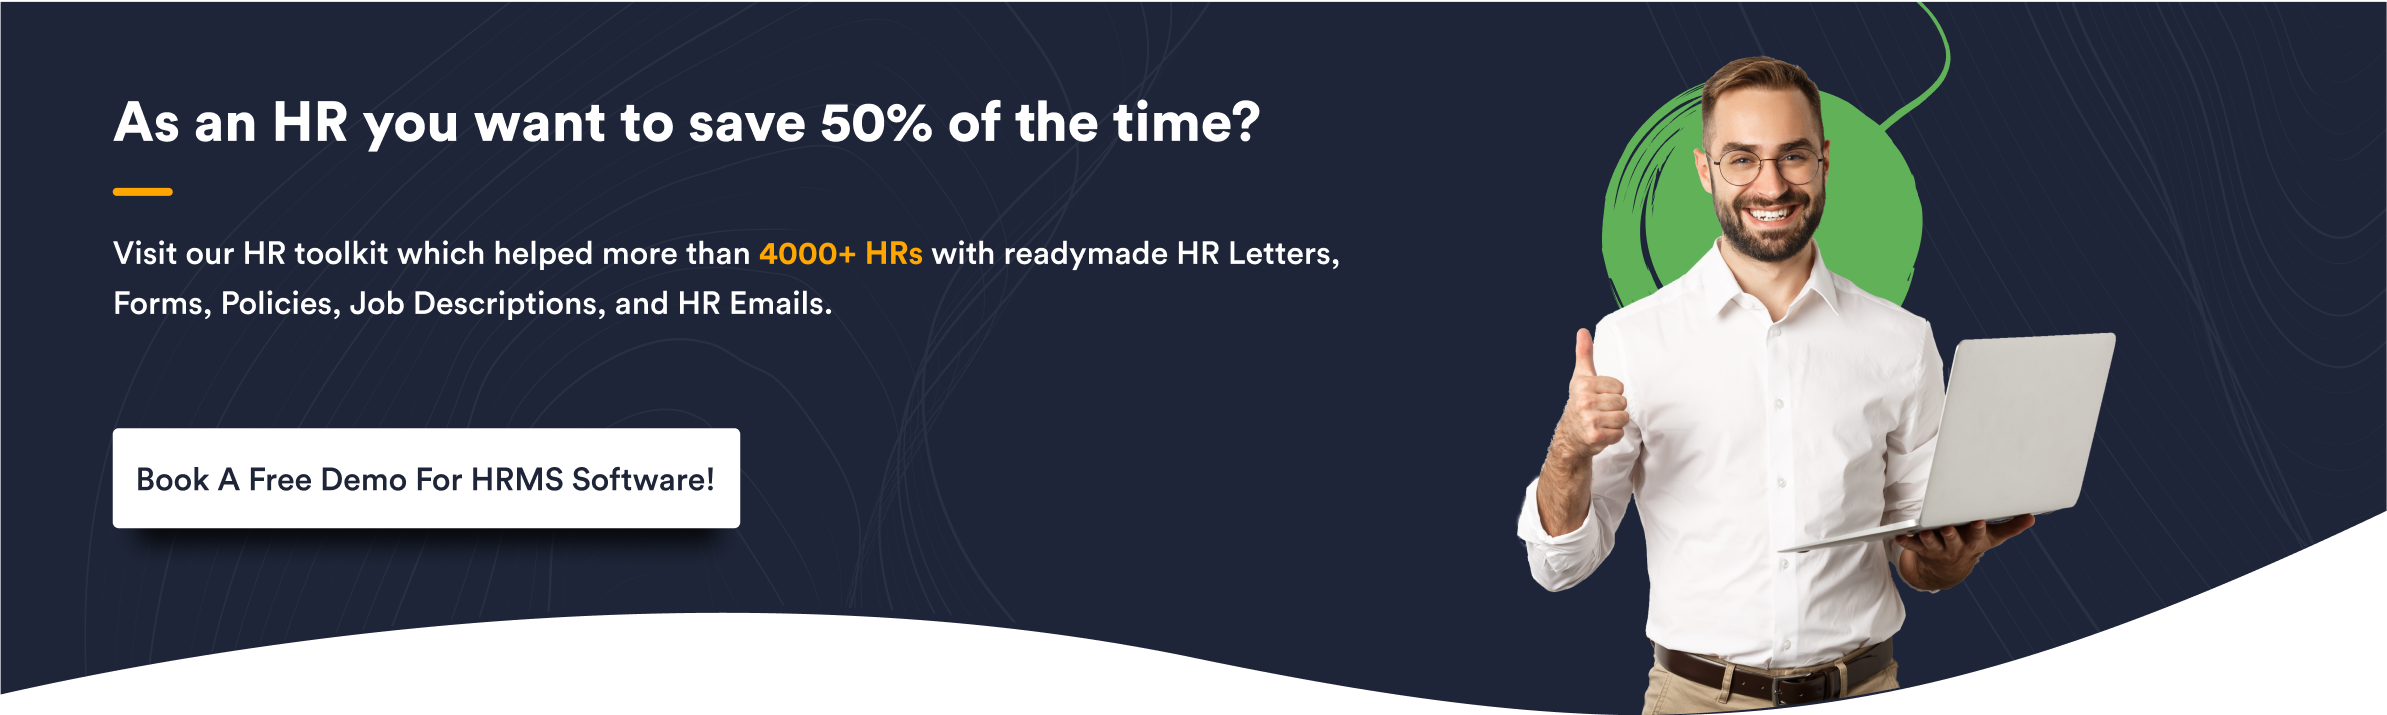 As an HR you want to save 50 of the time2